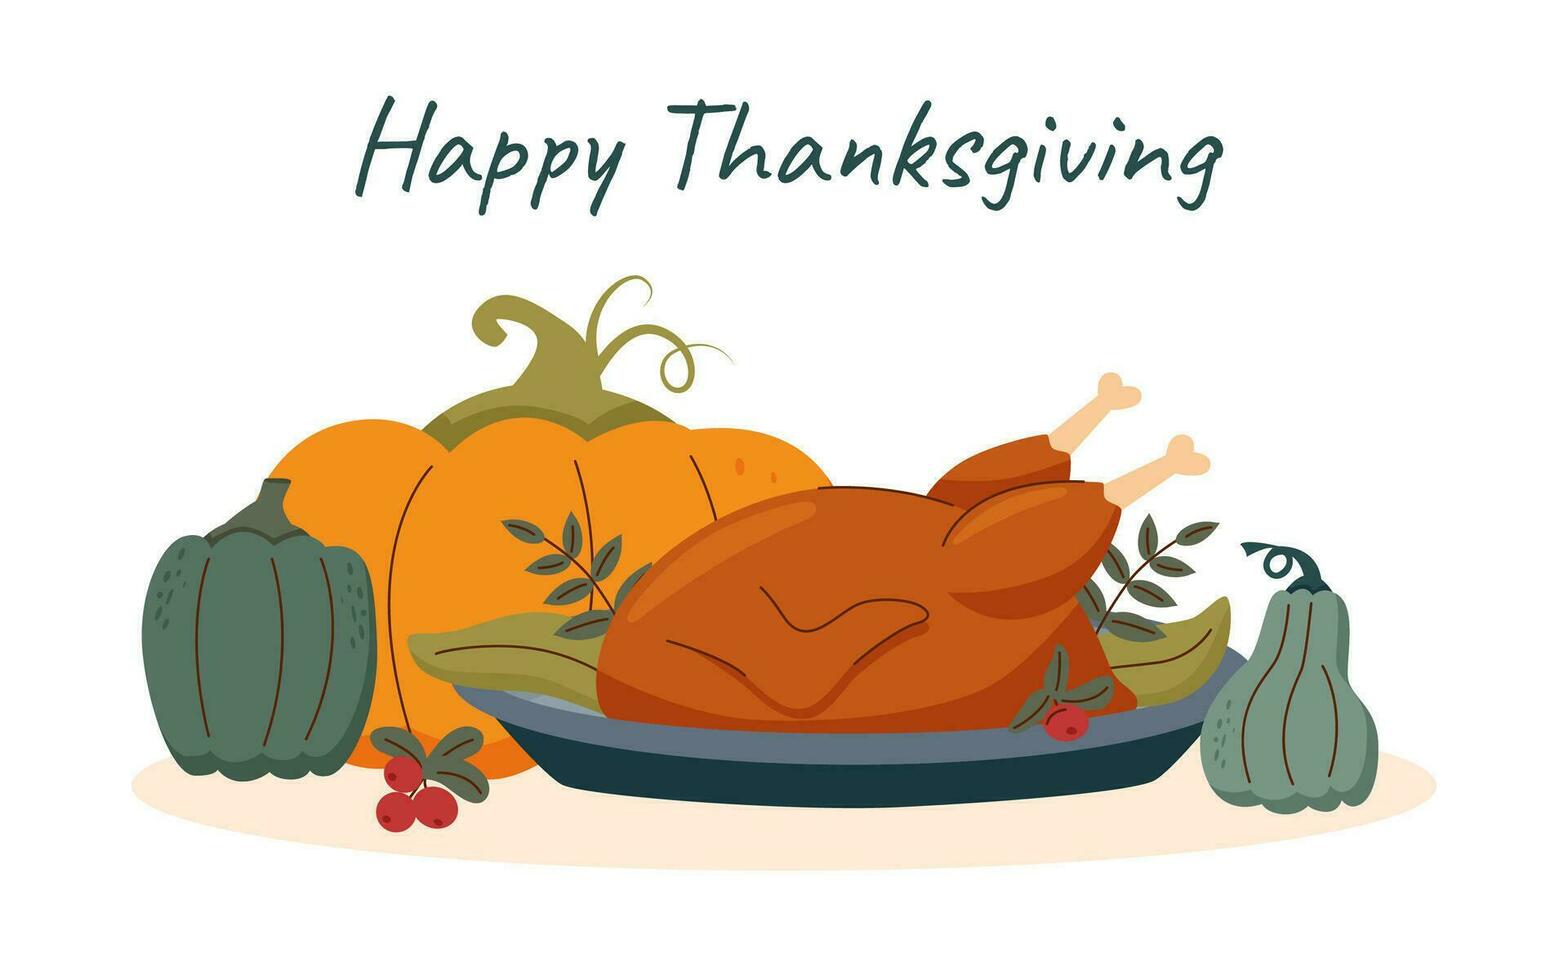 Thanksgiving background with turkey and pumpkins vector